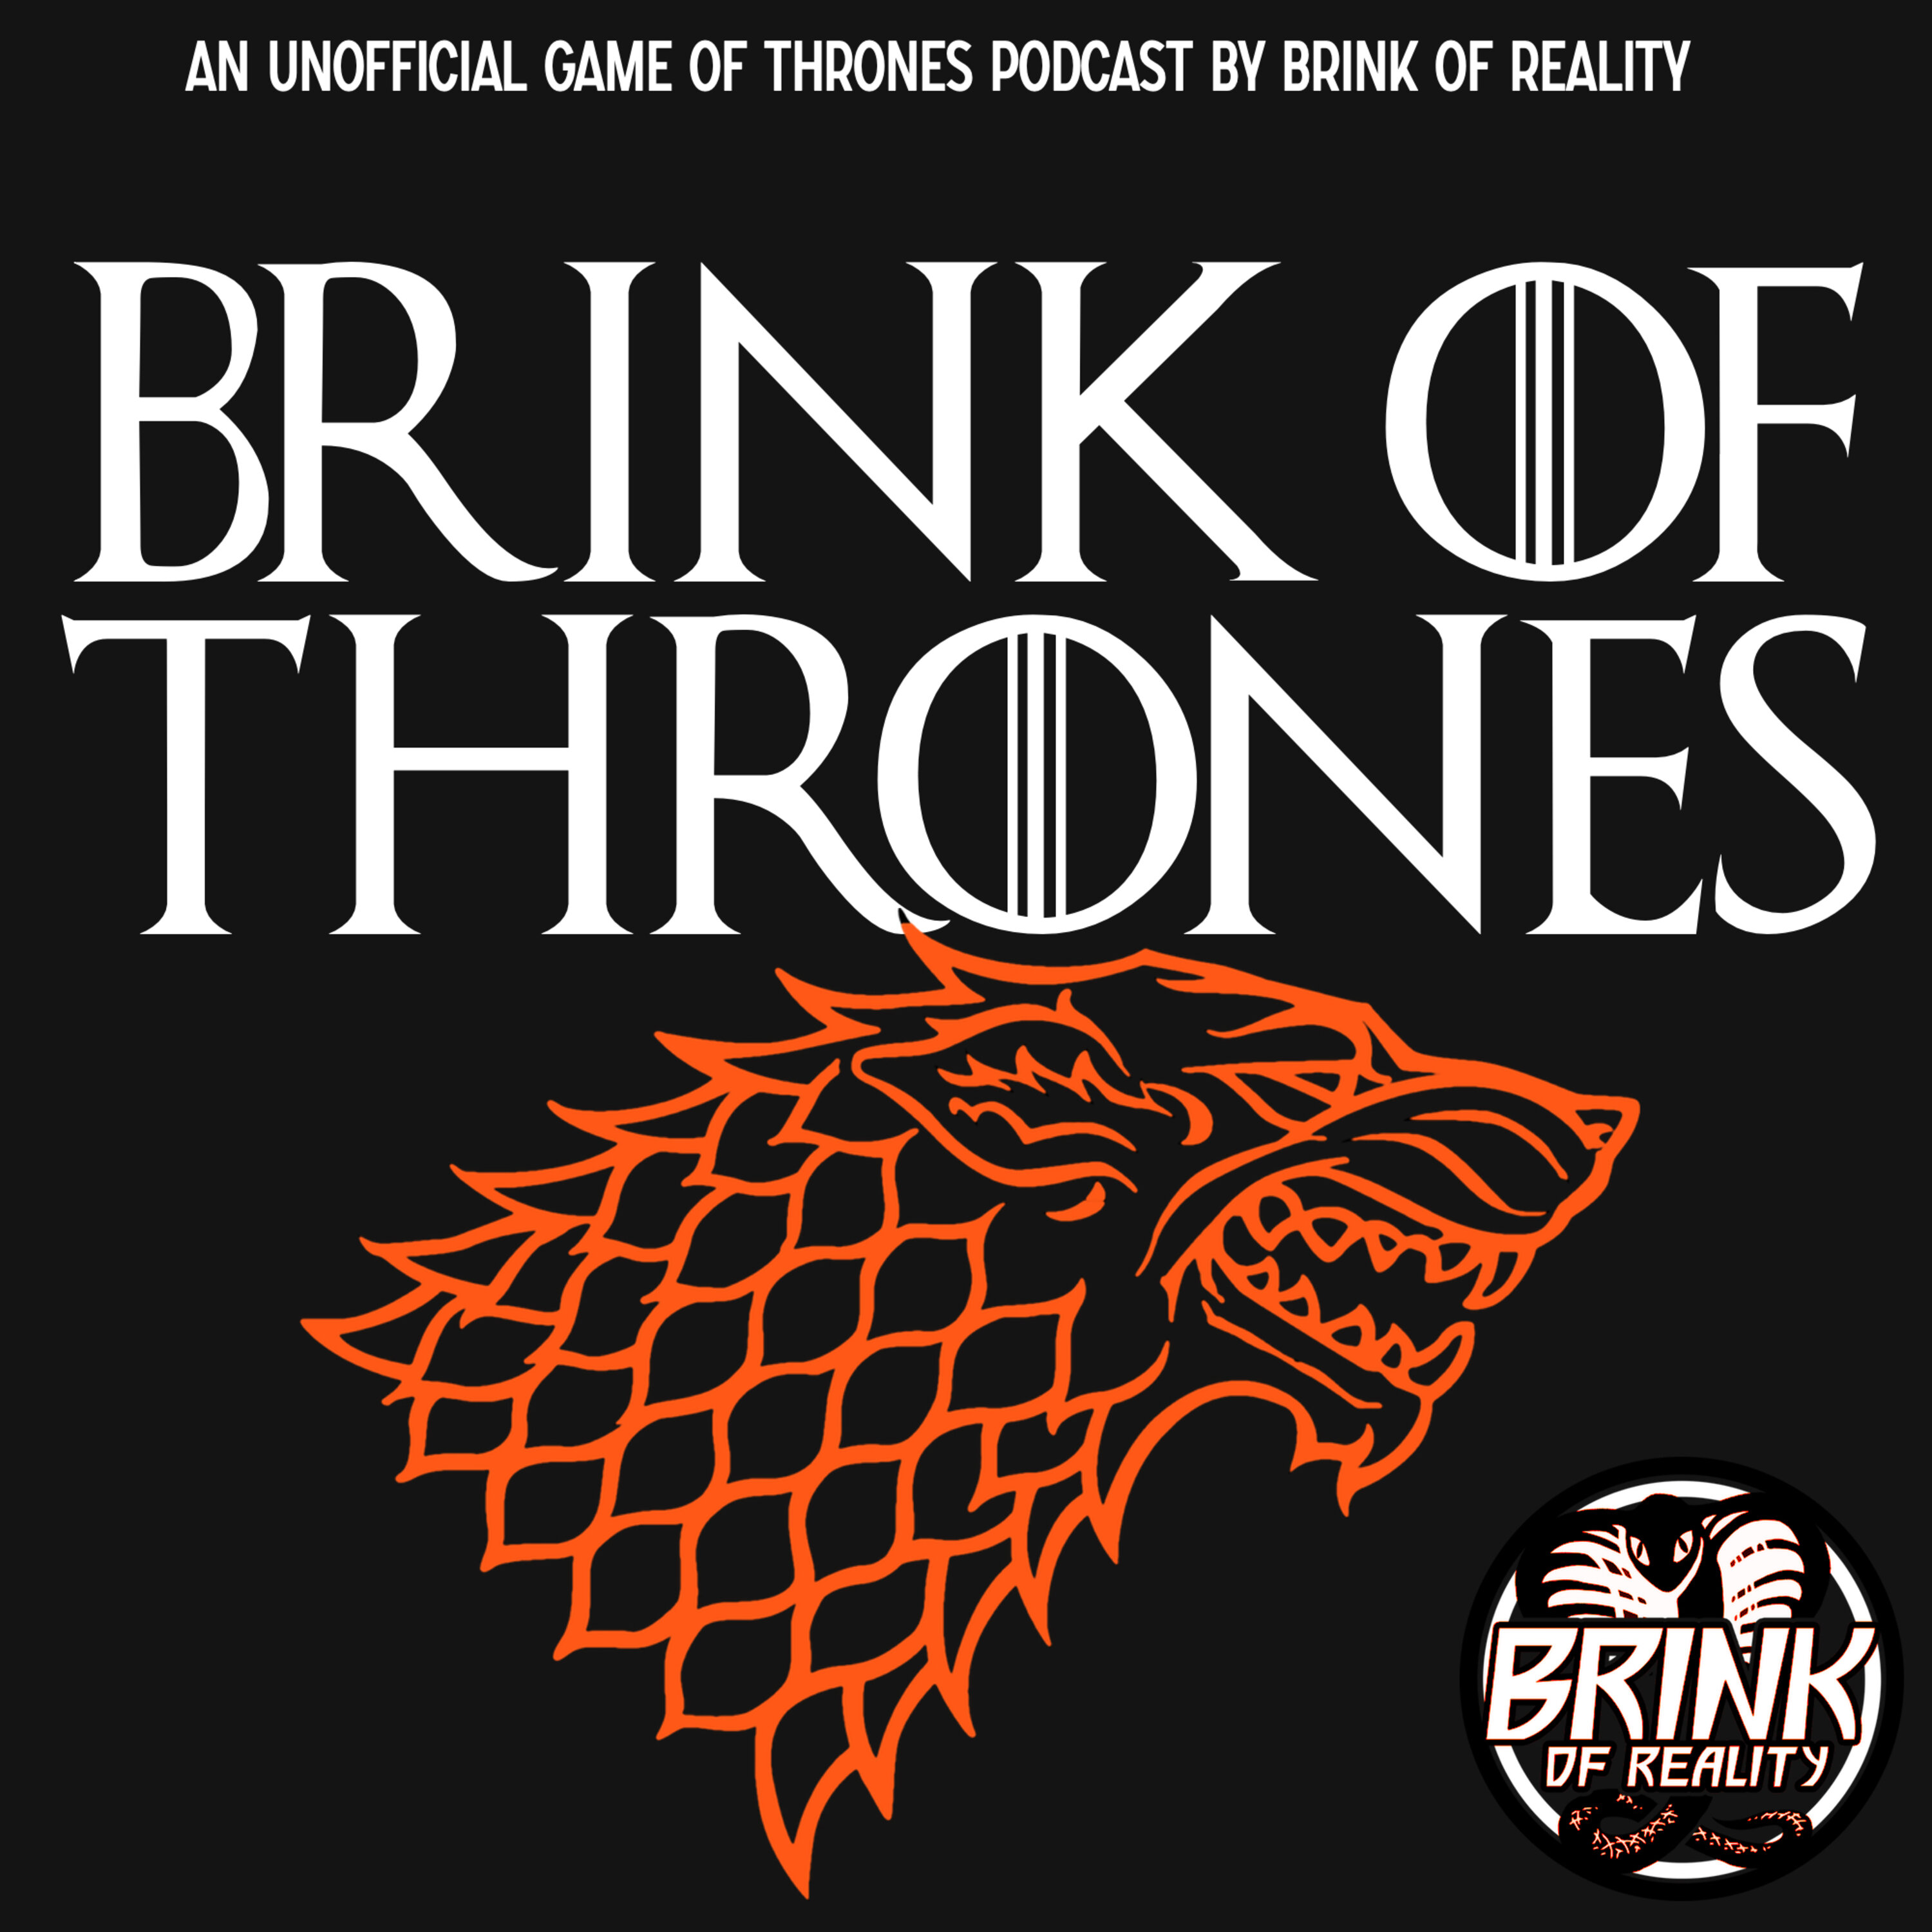 Game Of Thrones S8E2: The Knight of the Seven Kingdoms Links - Search ”Brink Of Thrones” on your podcast app